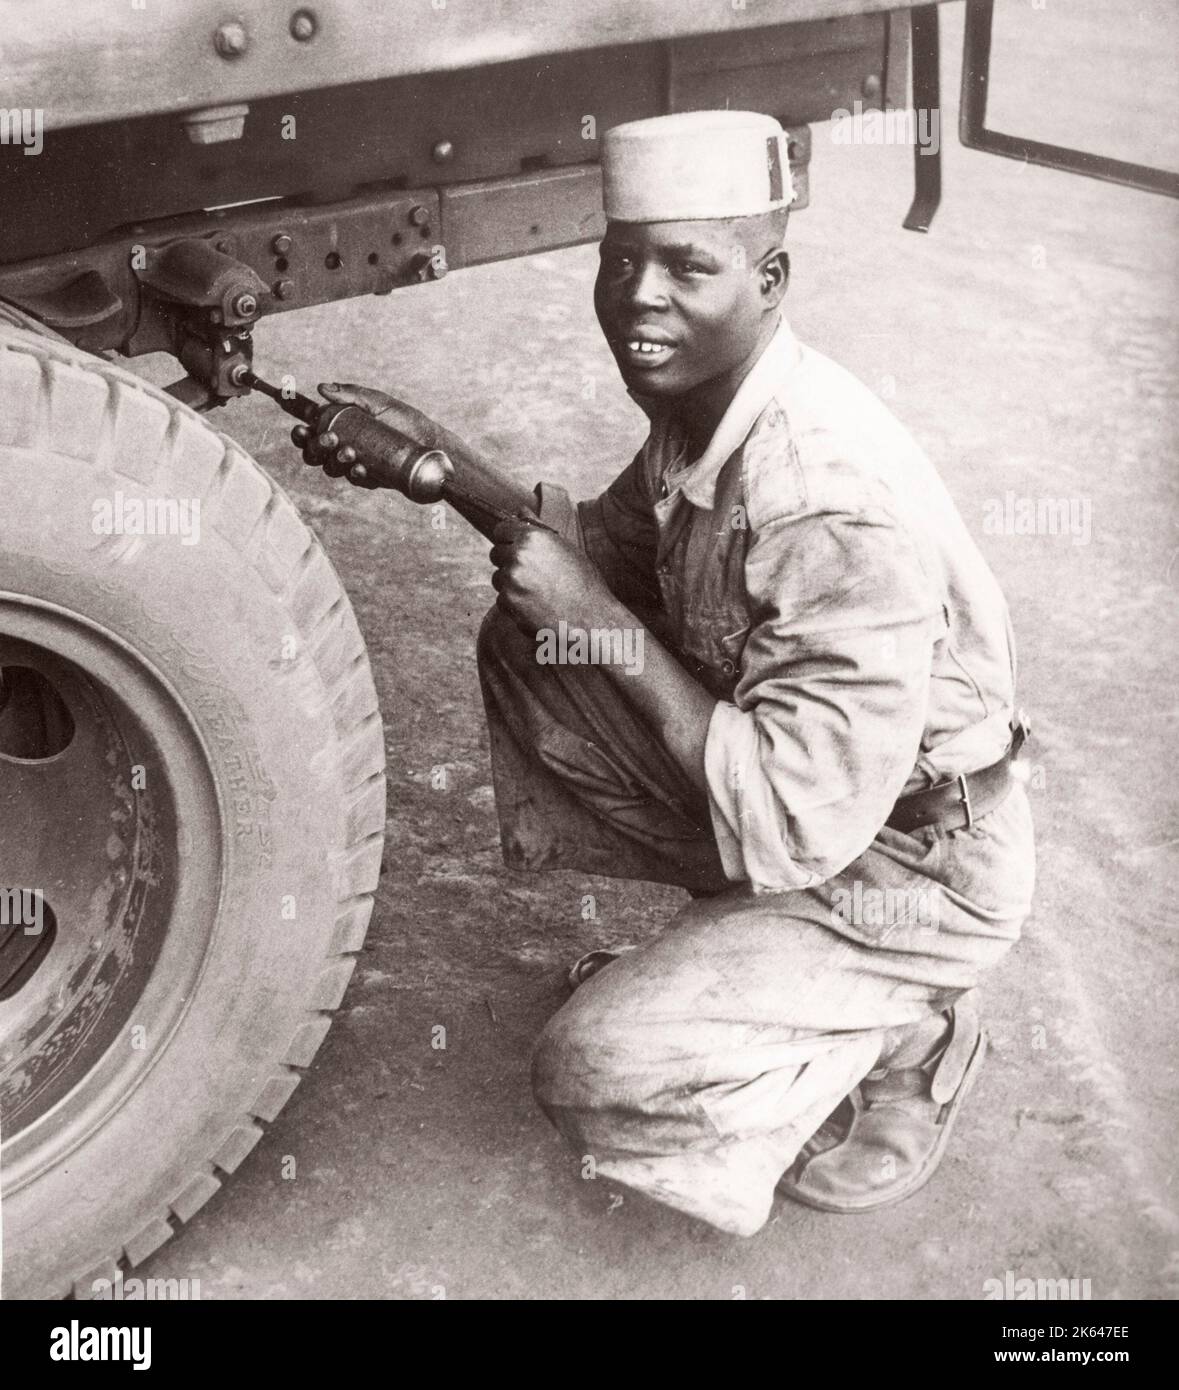 1940s East Africa - army driver Photograph by a British army recruitment officer stationed in East Africa and the Middle East during World War II Stock Photo